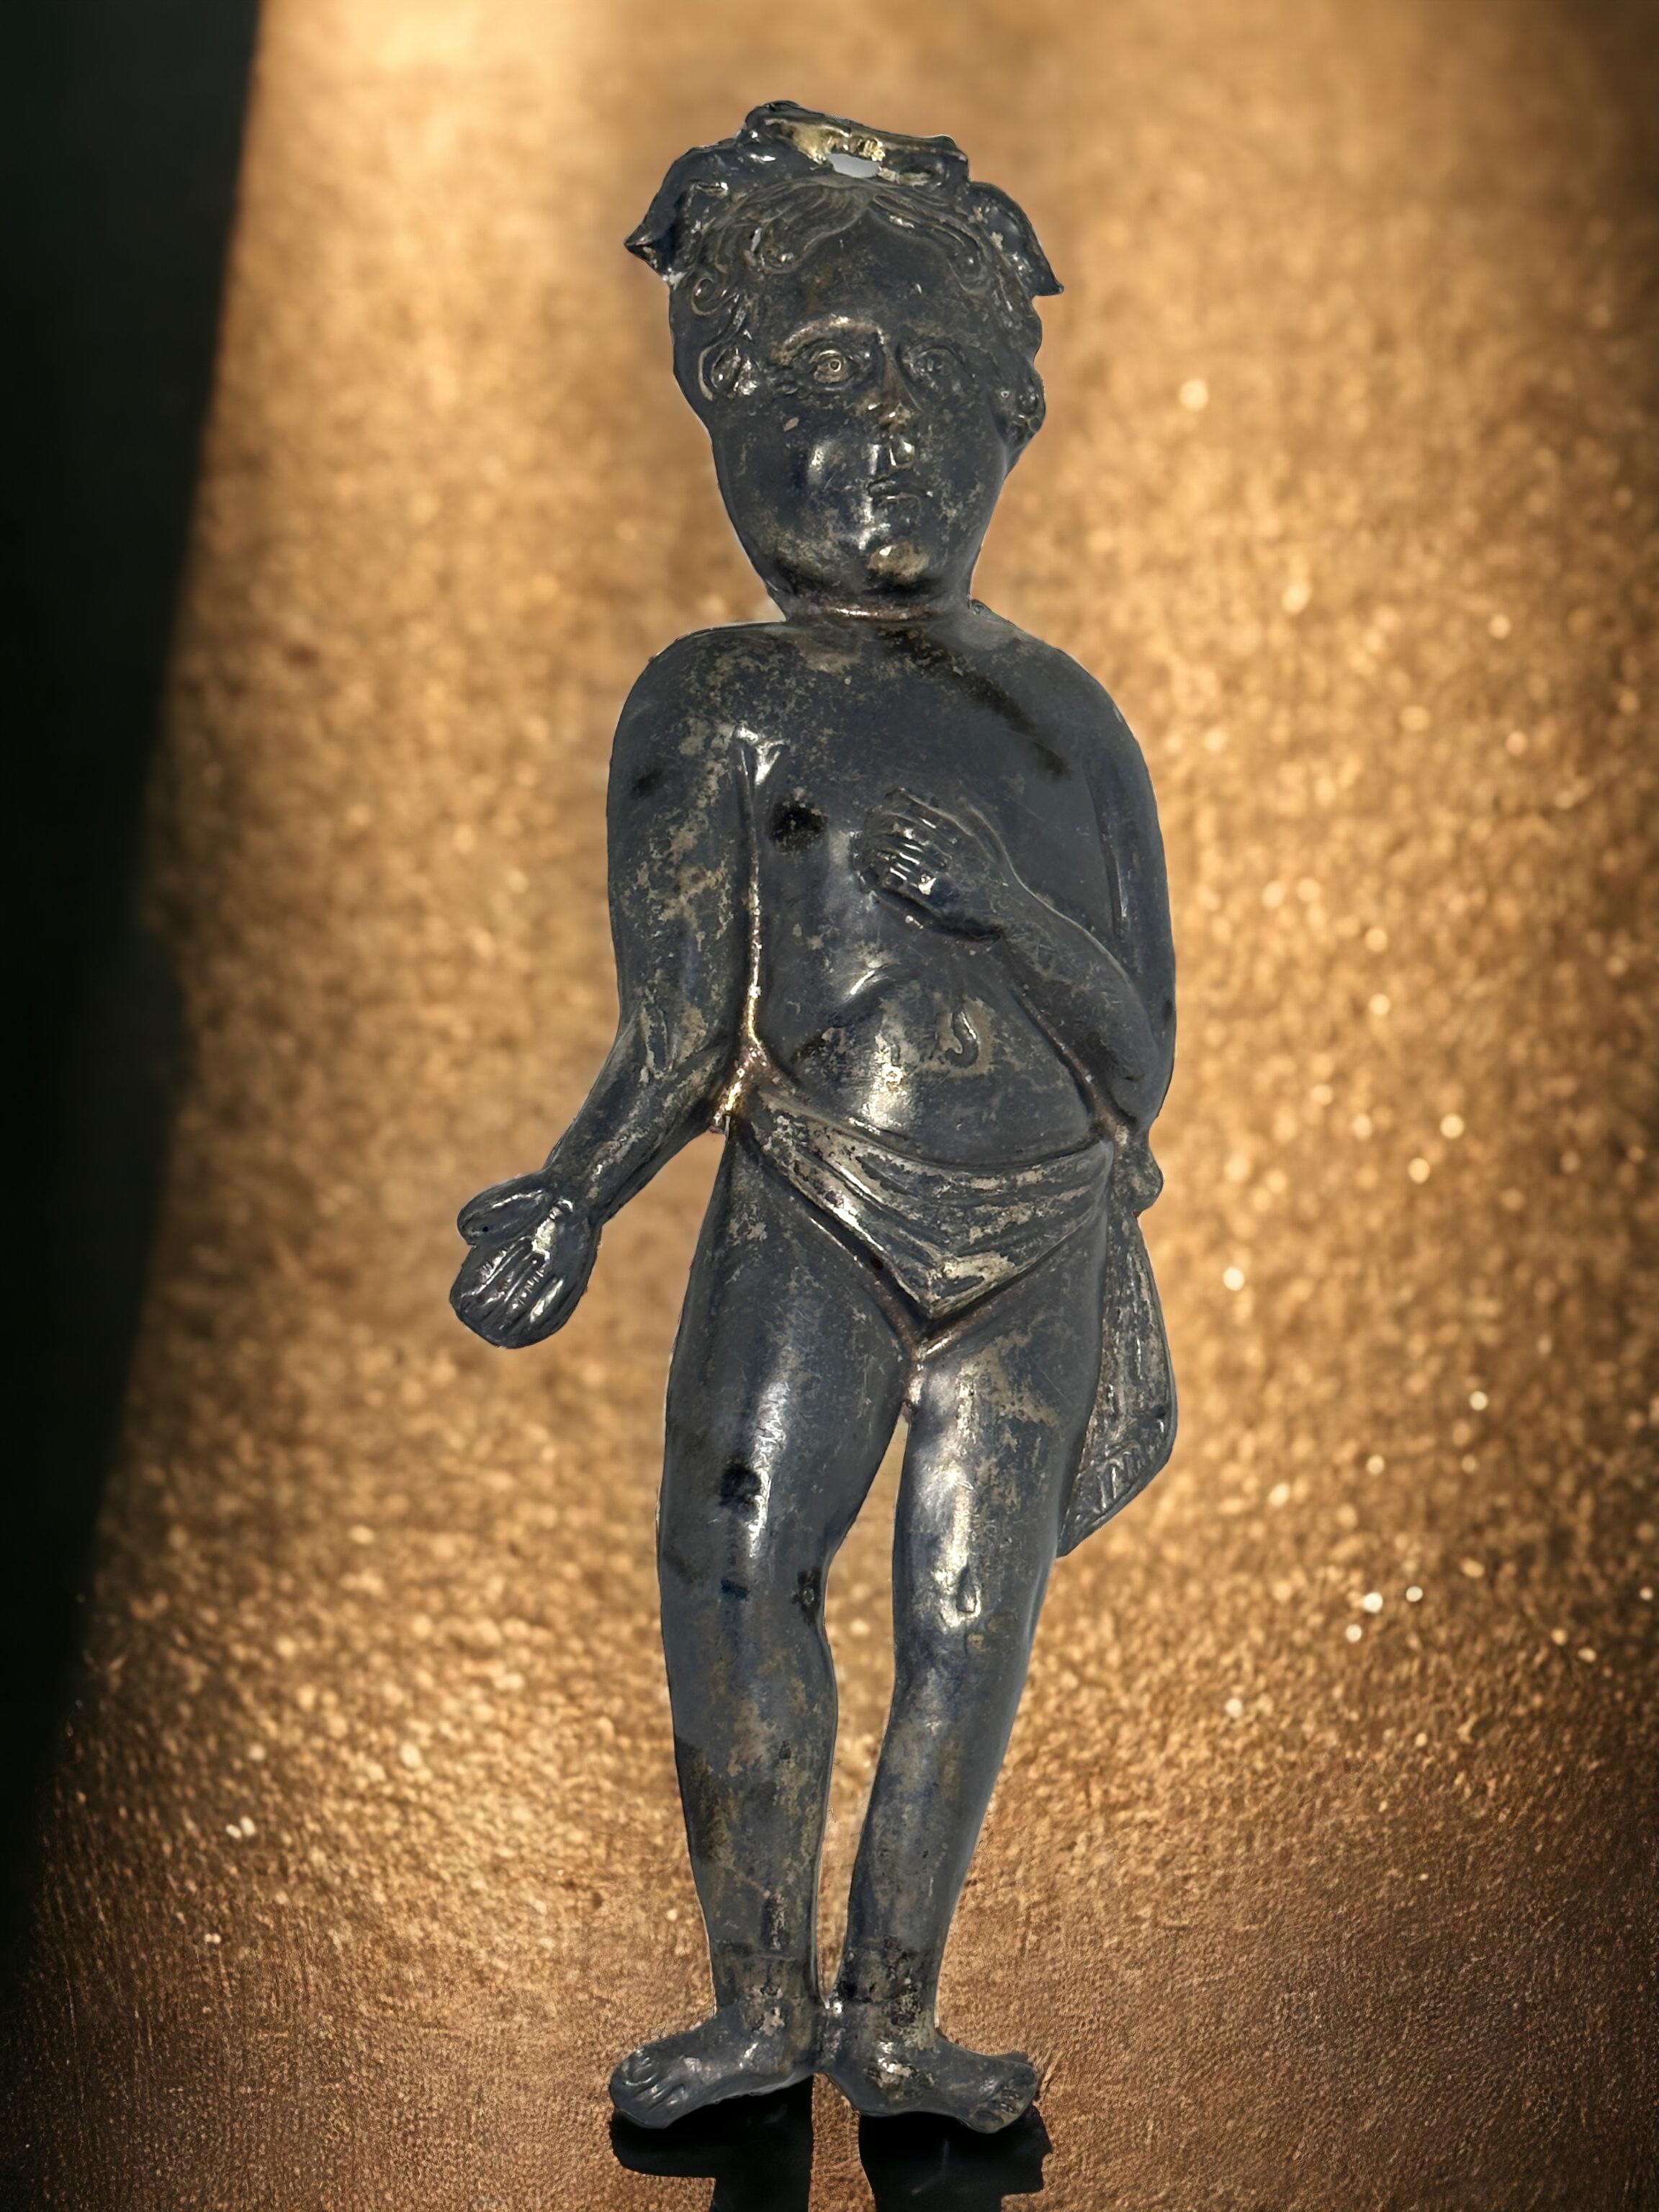 Antique and large ex voto in the shape of a male figure, in silver, from the early 1890s, Italy.
Perfect vintage condition, there are no breakages or signs of repairs.
Beautiful face expression and a wonderful patina of time. 
At the top there is an